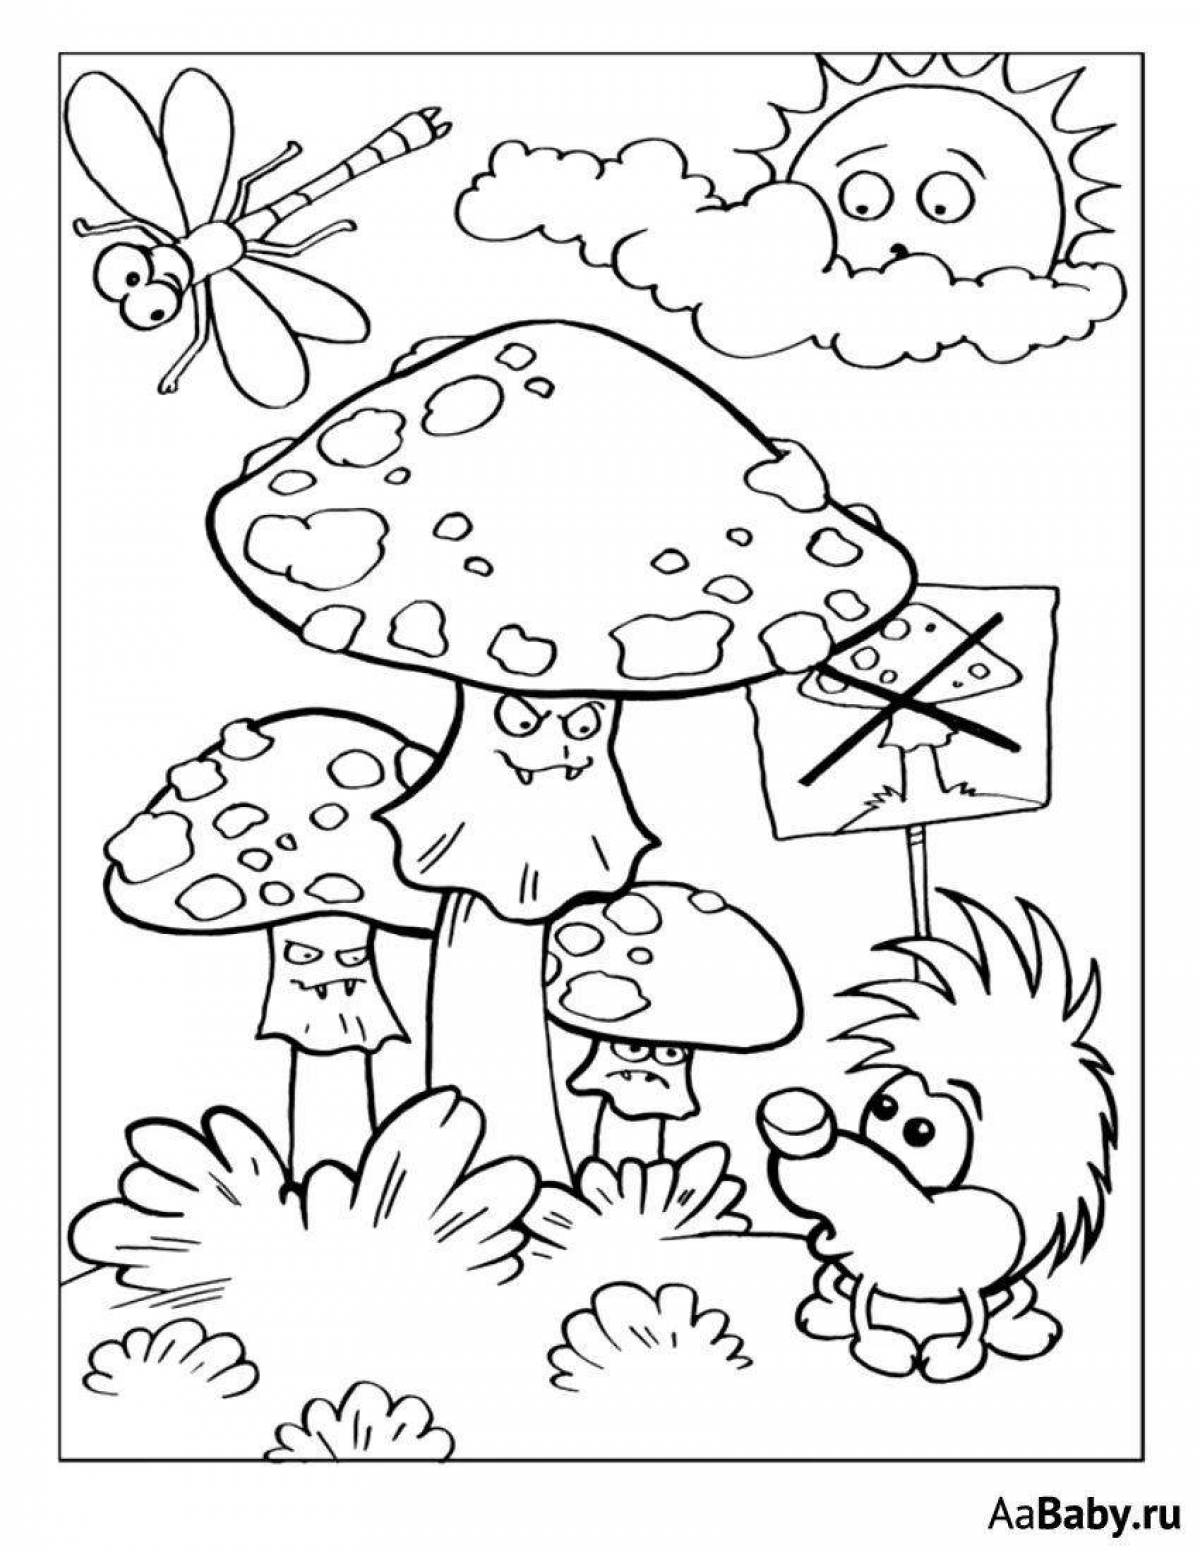 Fabulous fly agaric coloring book